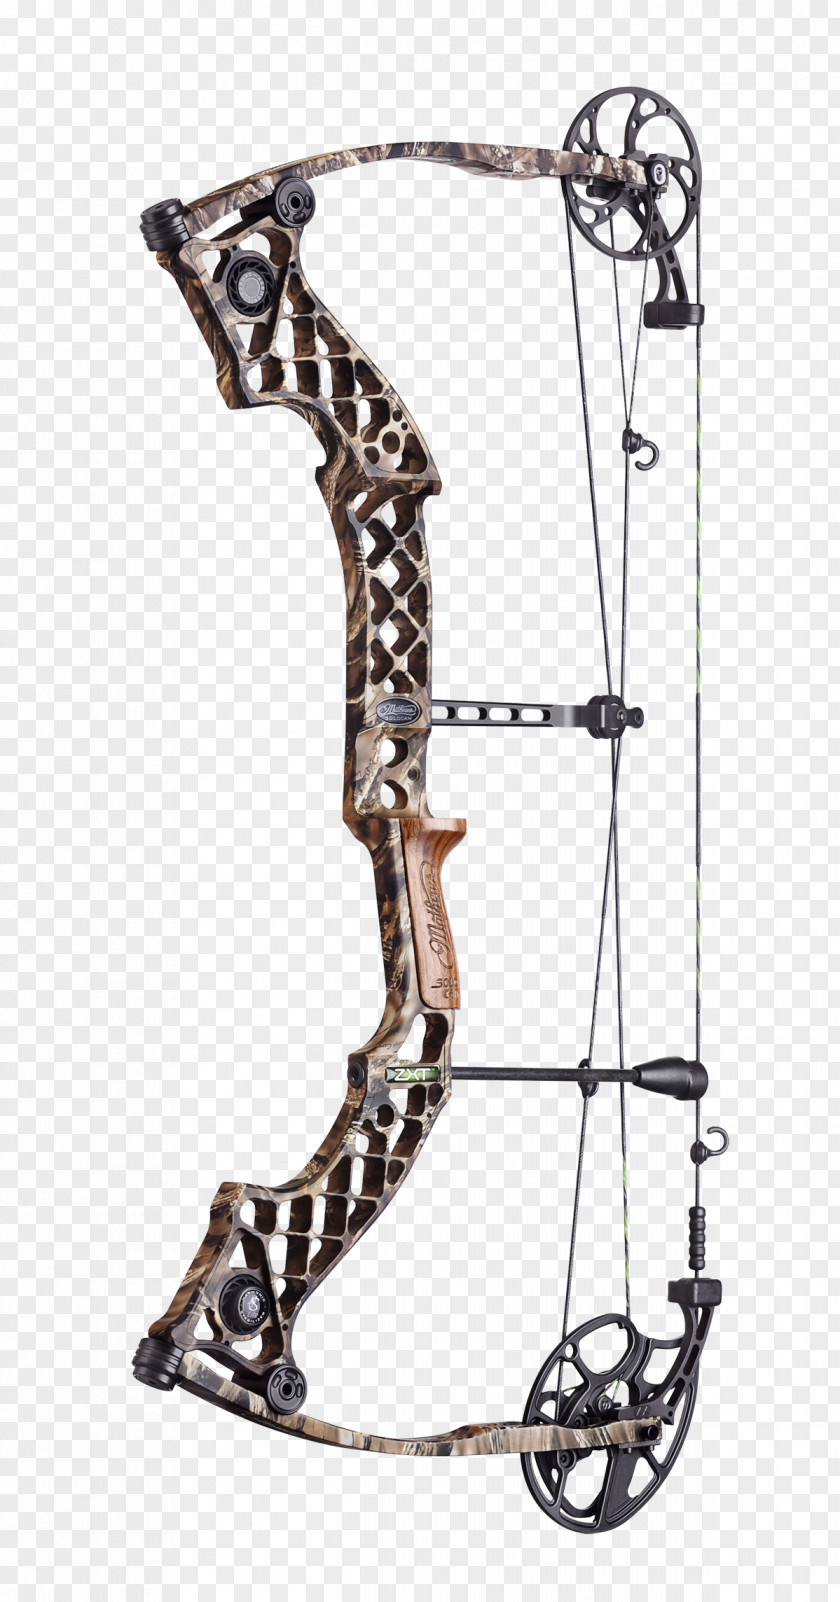 Archery Bow And Arrow Mathews Archery, Inc. Compound Bows Bowhunting PNG